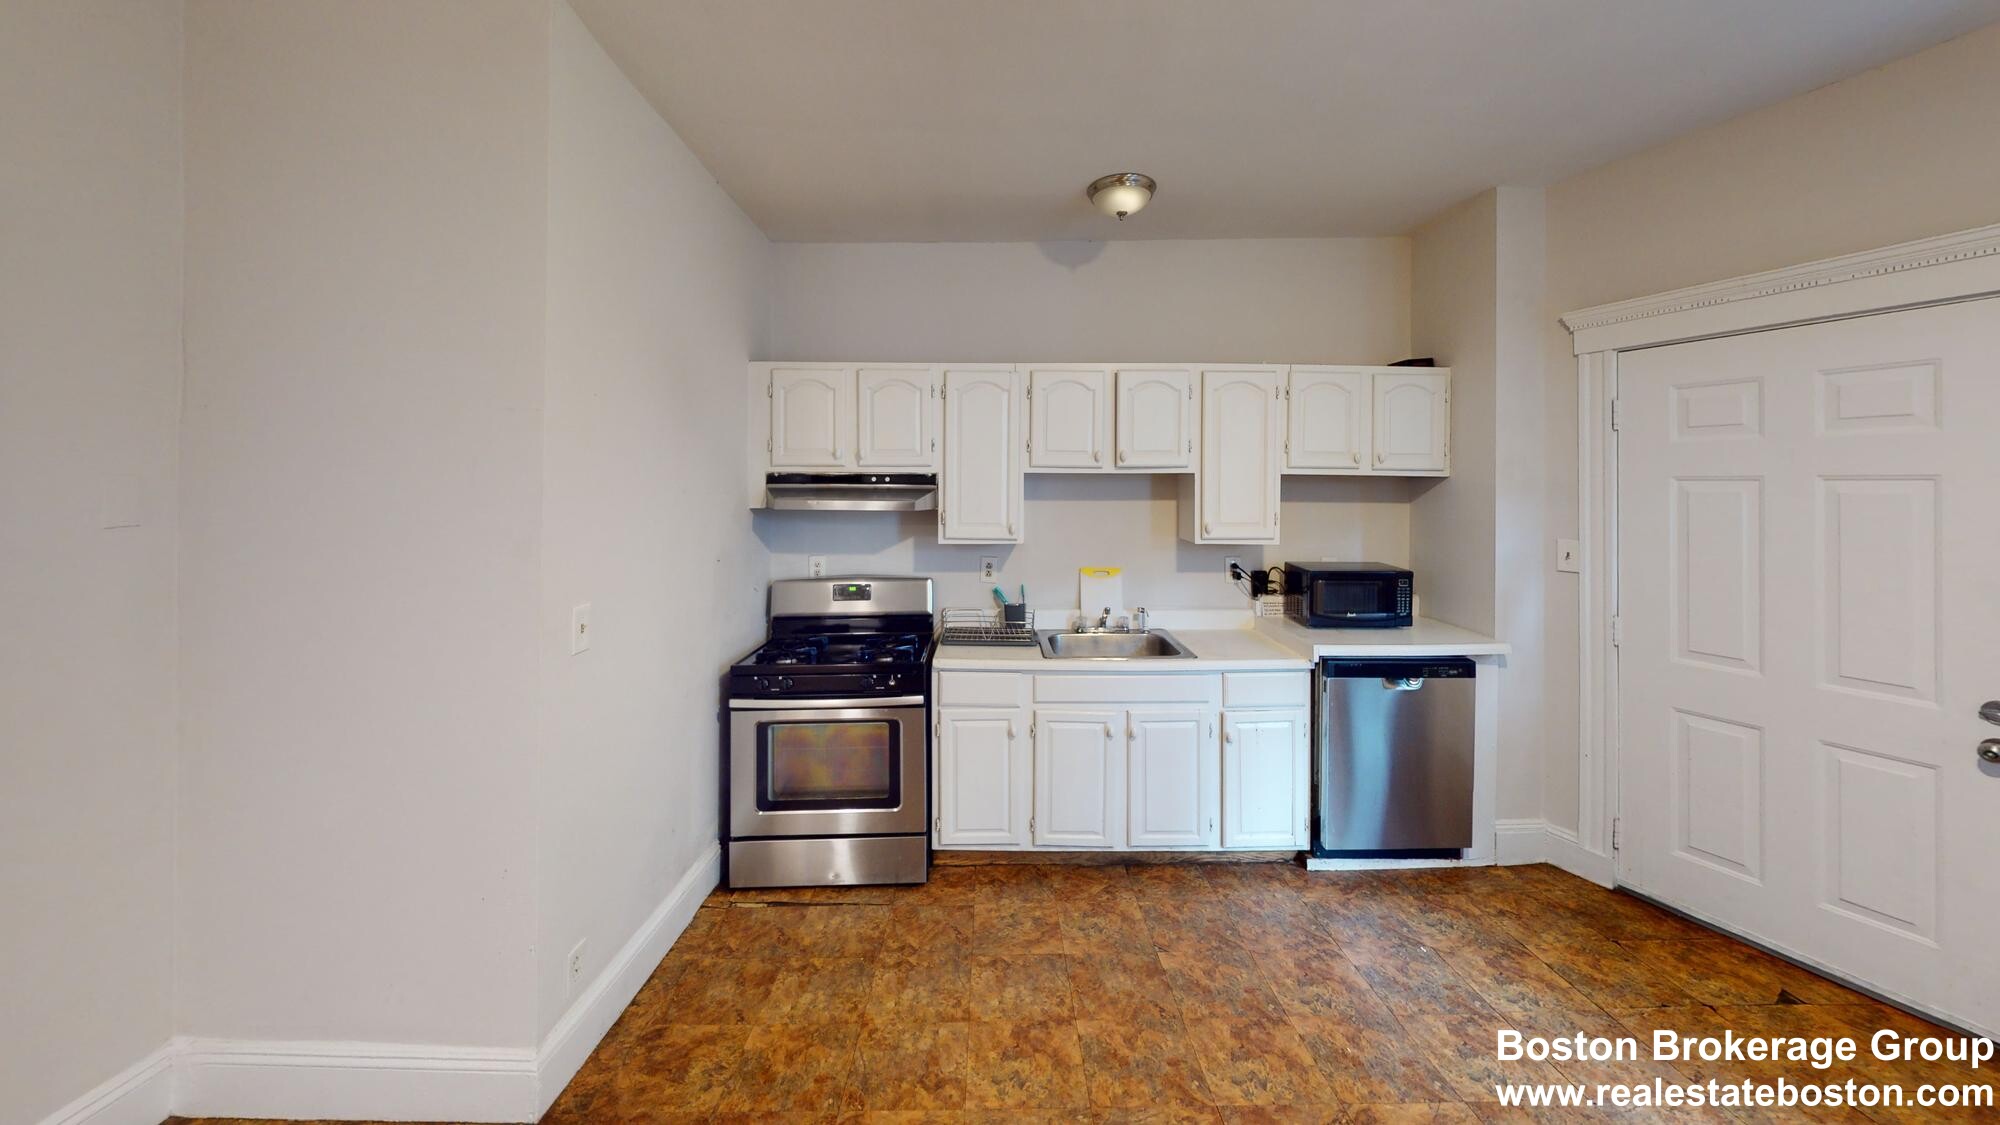 Photos of apartment on Oyster Bay Rd.,Boston MA 02125